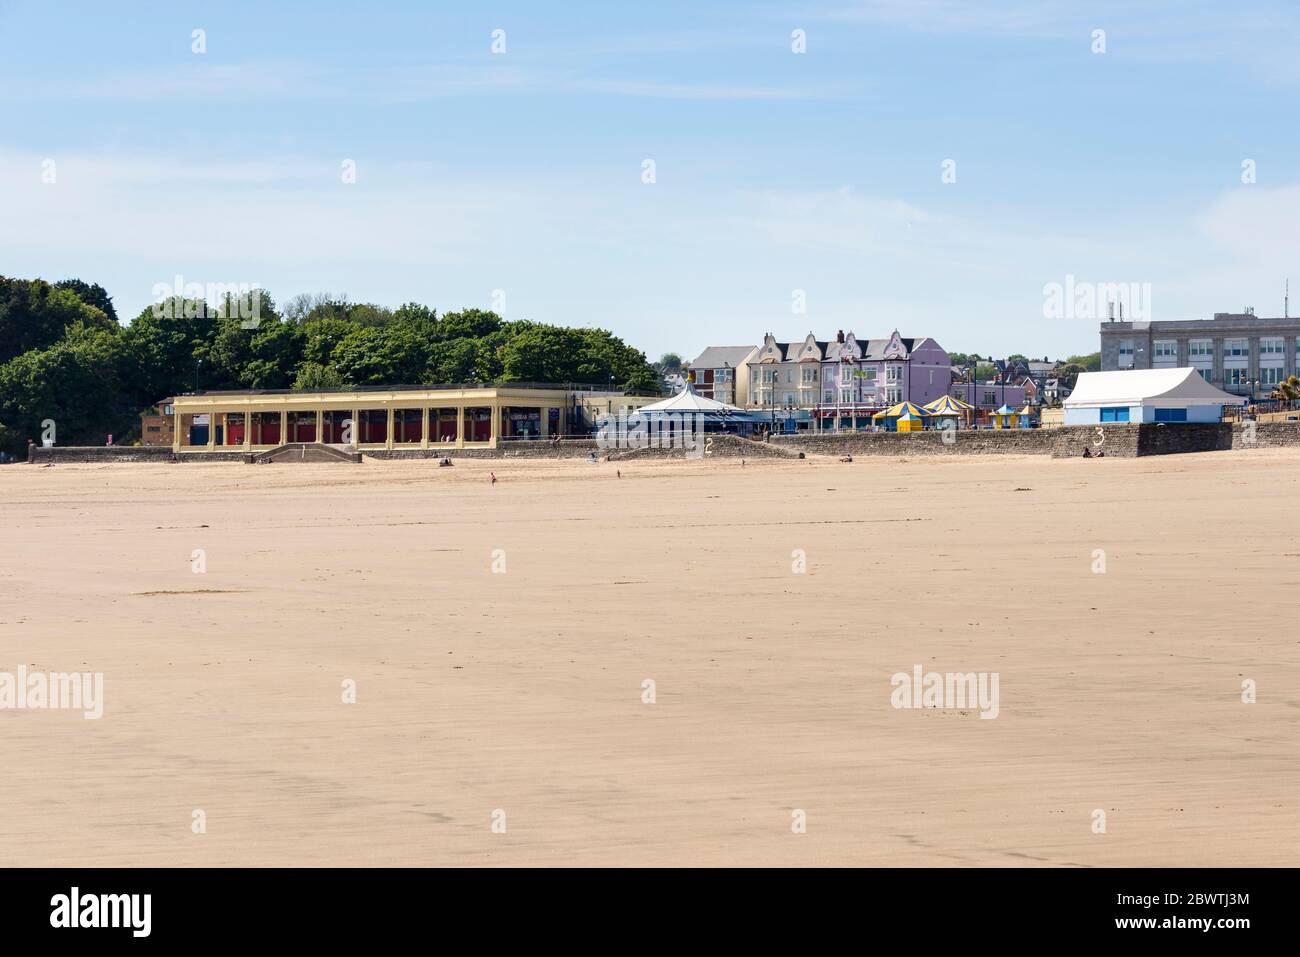 The sandy beach at Barry Island is very quiet on a sunny Spring bank holiday afternoon during the 2020 coronavirus crises. Stock Photo